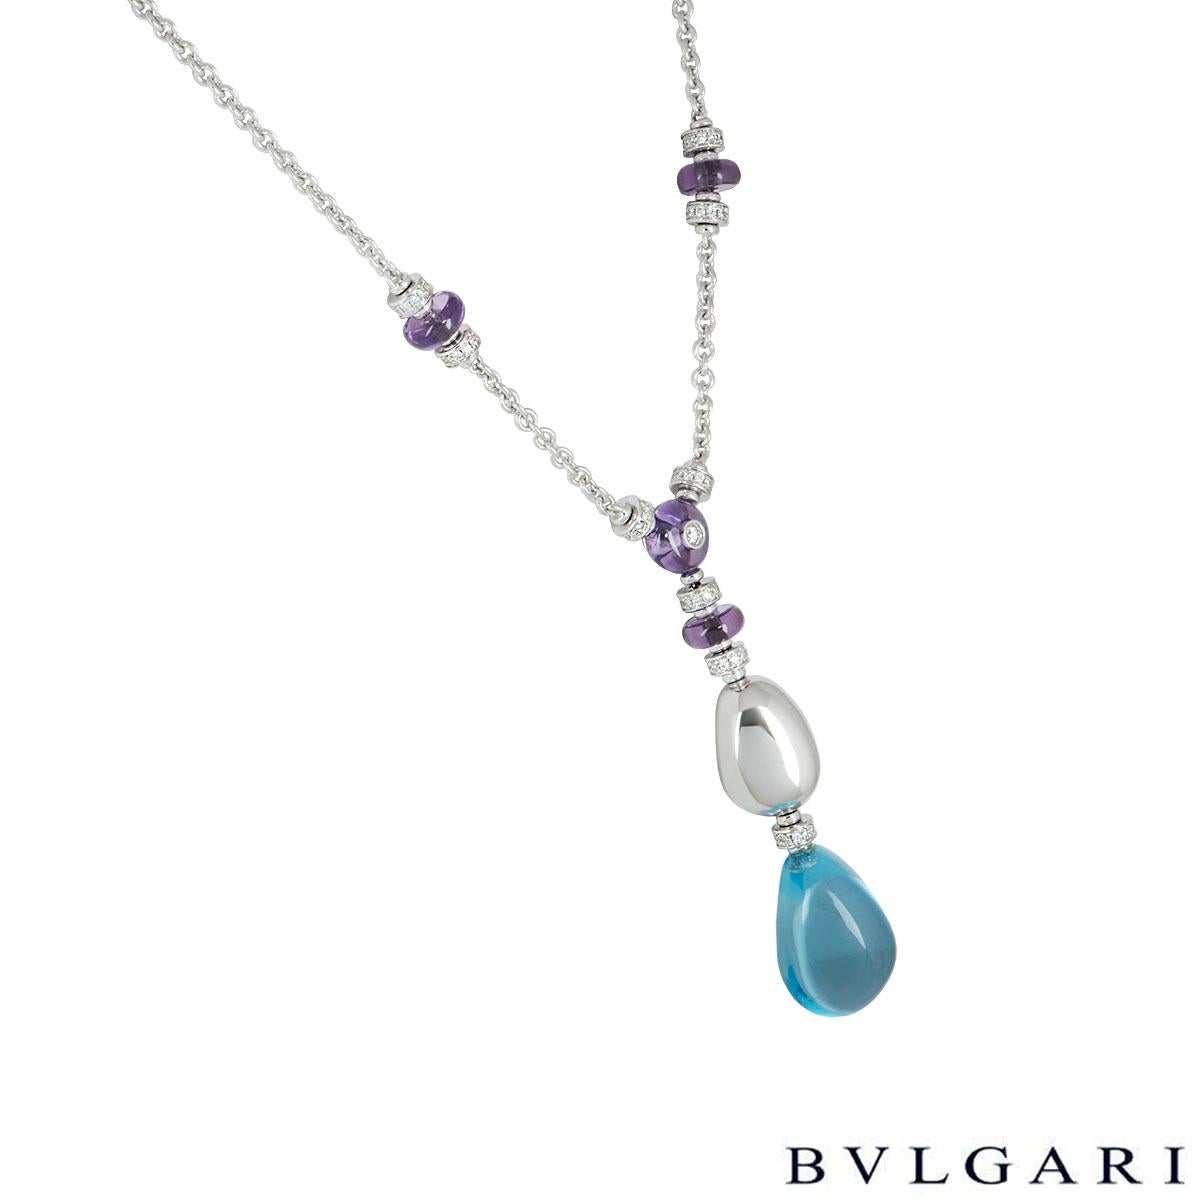 A beautiful 18k white gold necklace by Bvlgari from the Mediterranean Eden collection. The necklace comprises of a cabochon cut topaz with a round brilliant cut diamond placed in the middle. Suspended beneath it are diamond set discs with a amethyst